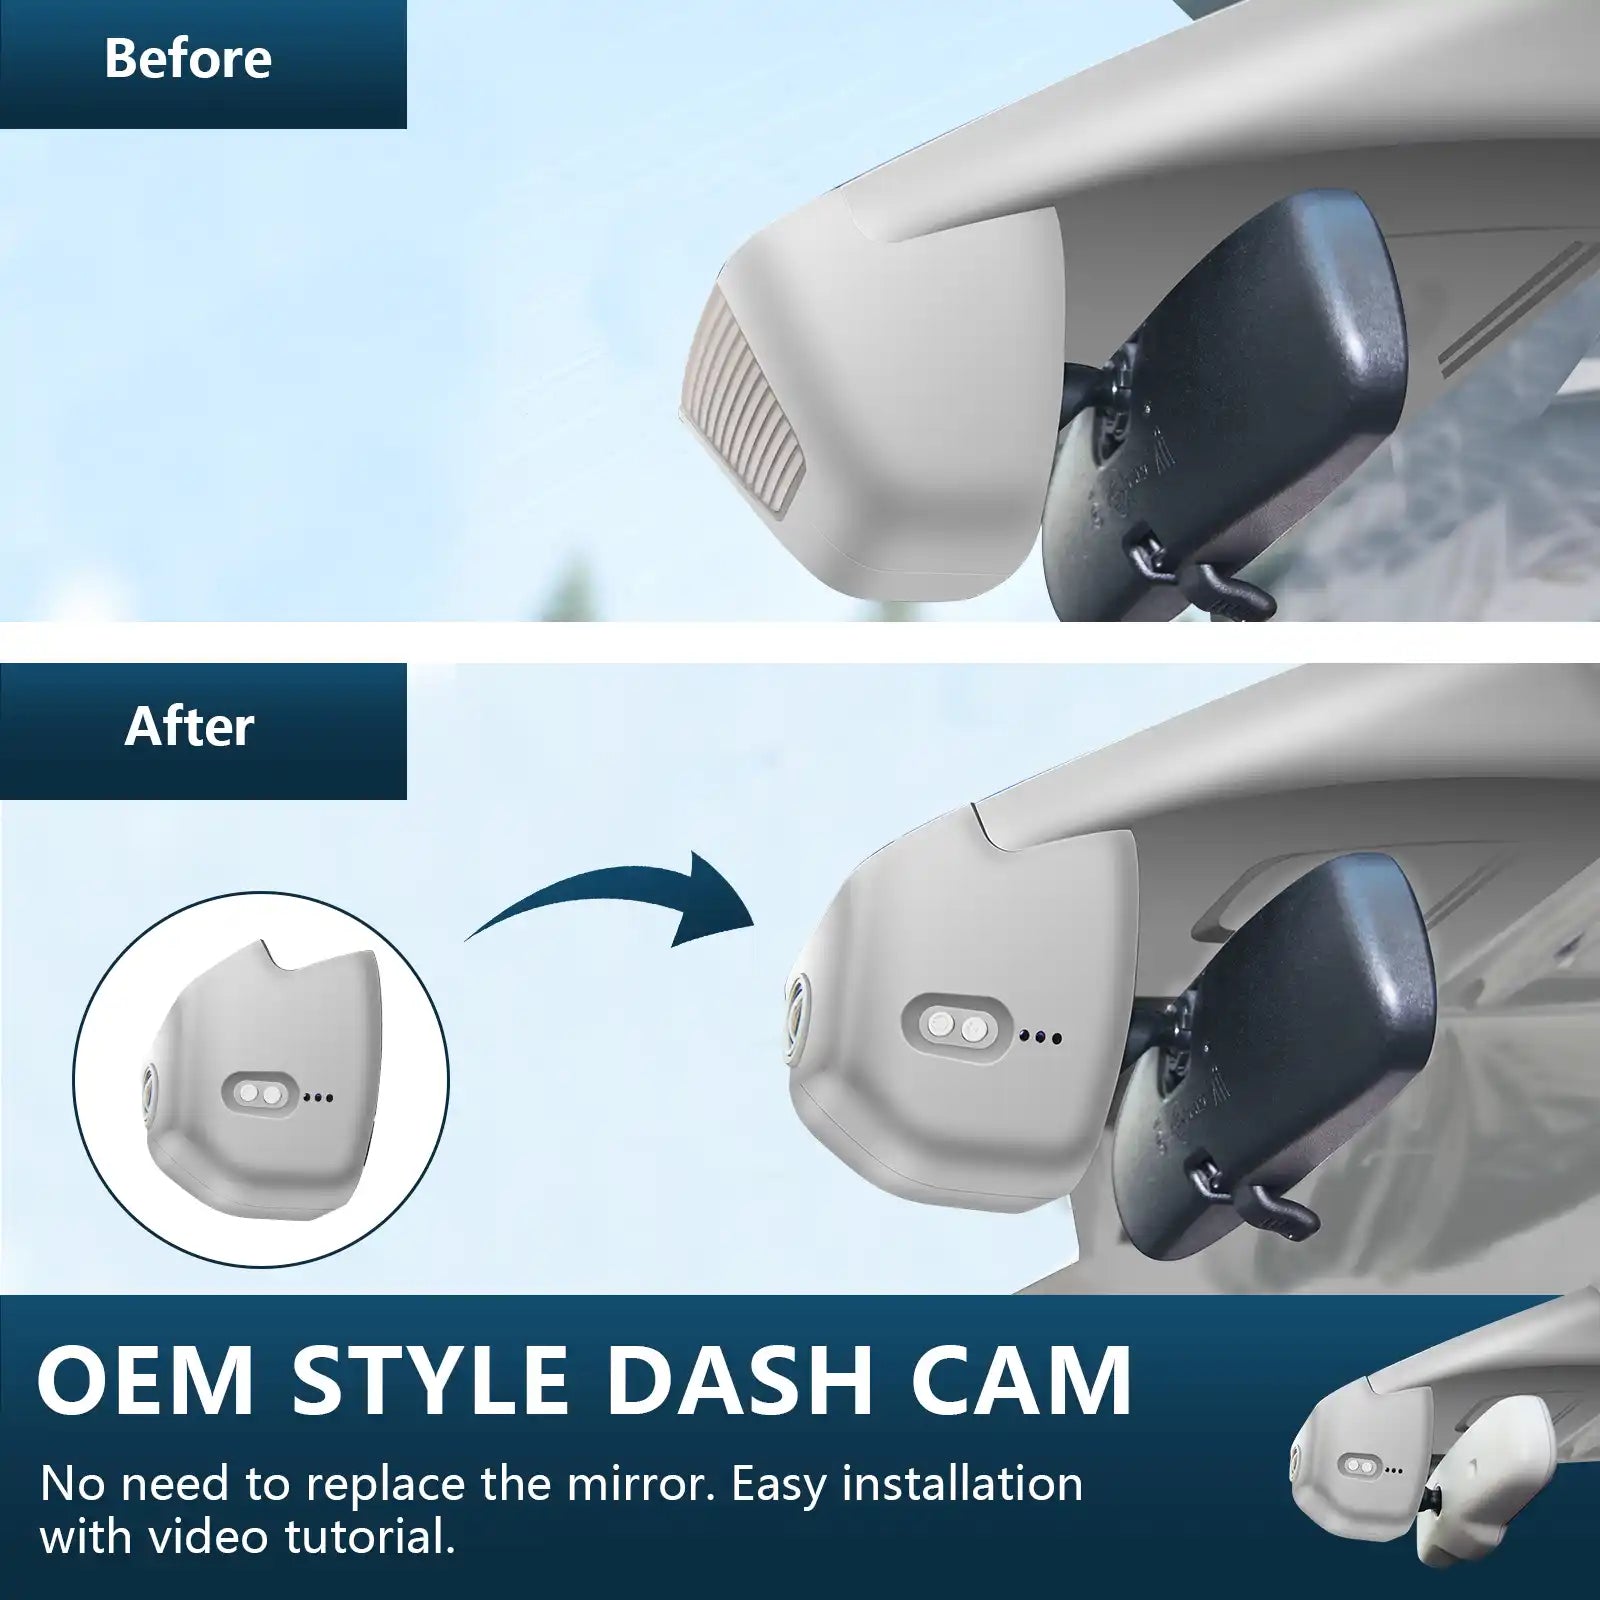 Honda Civic dash cam before and after installation view 